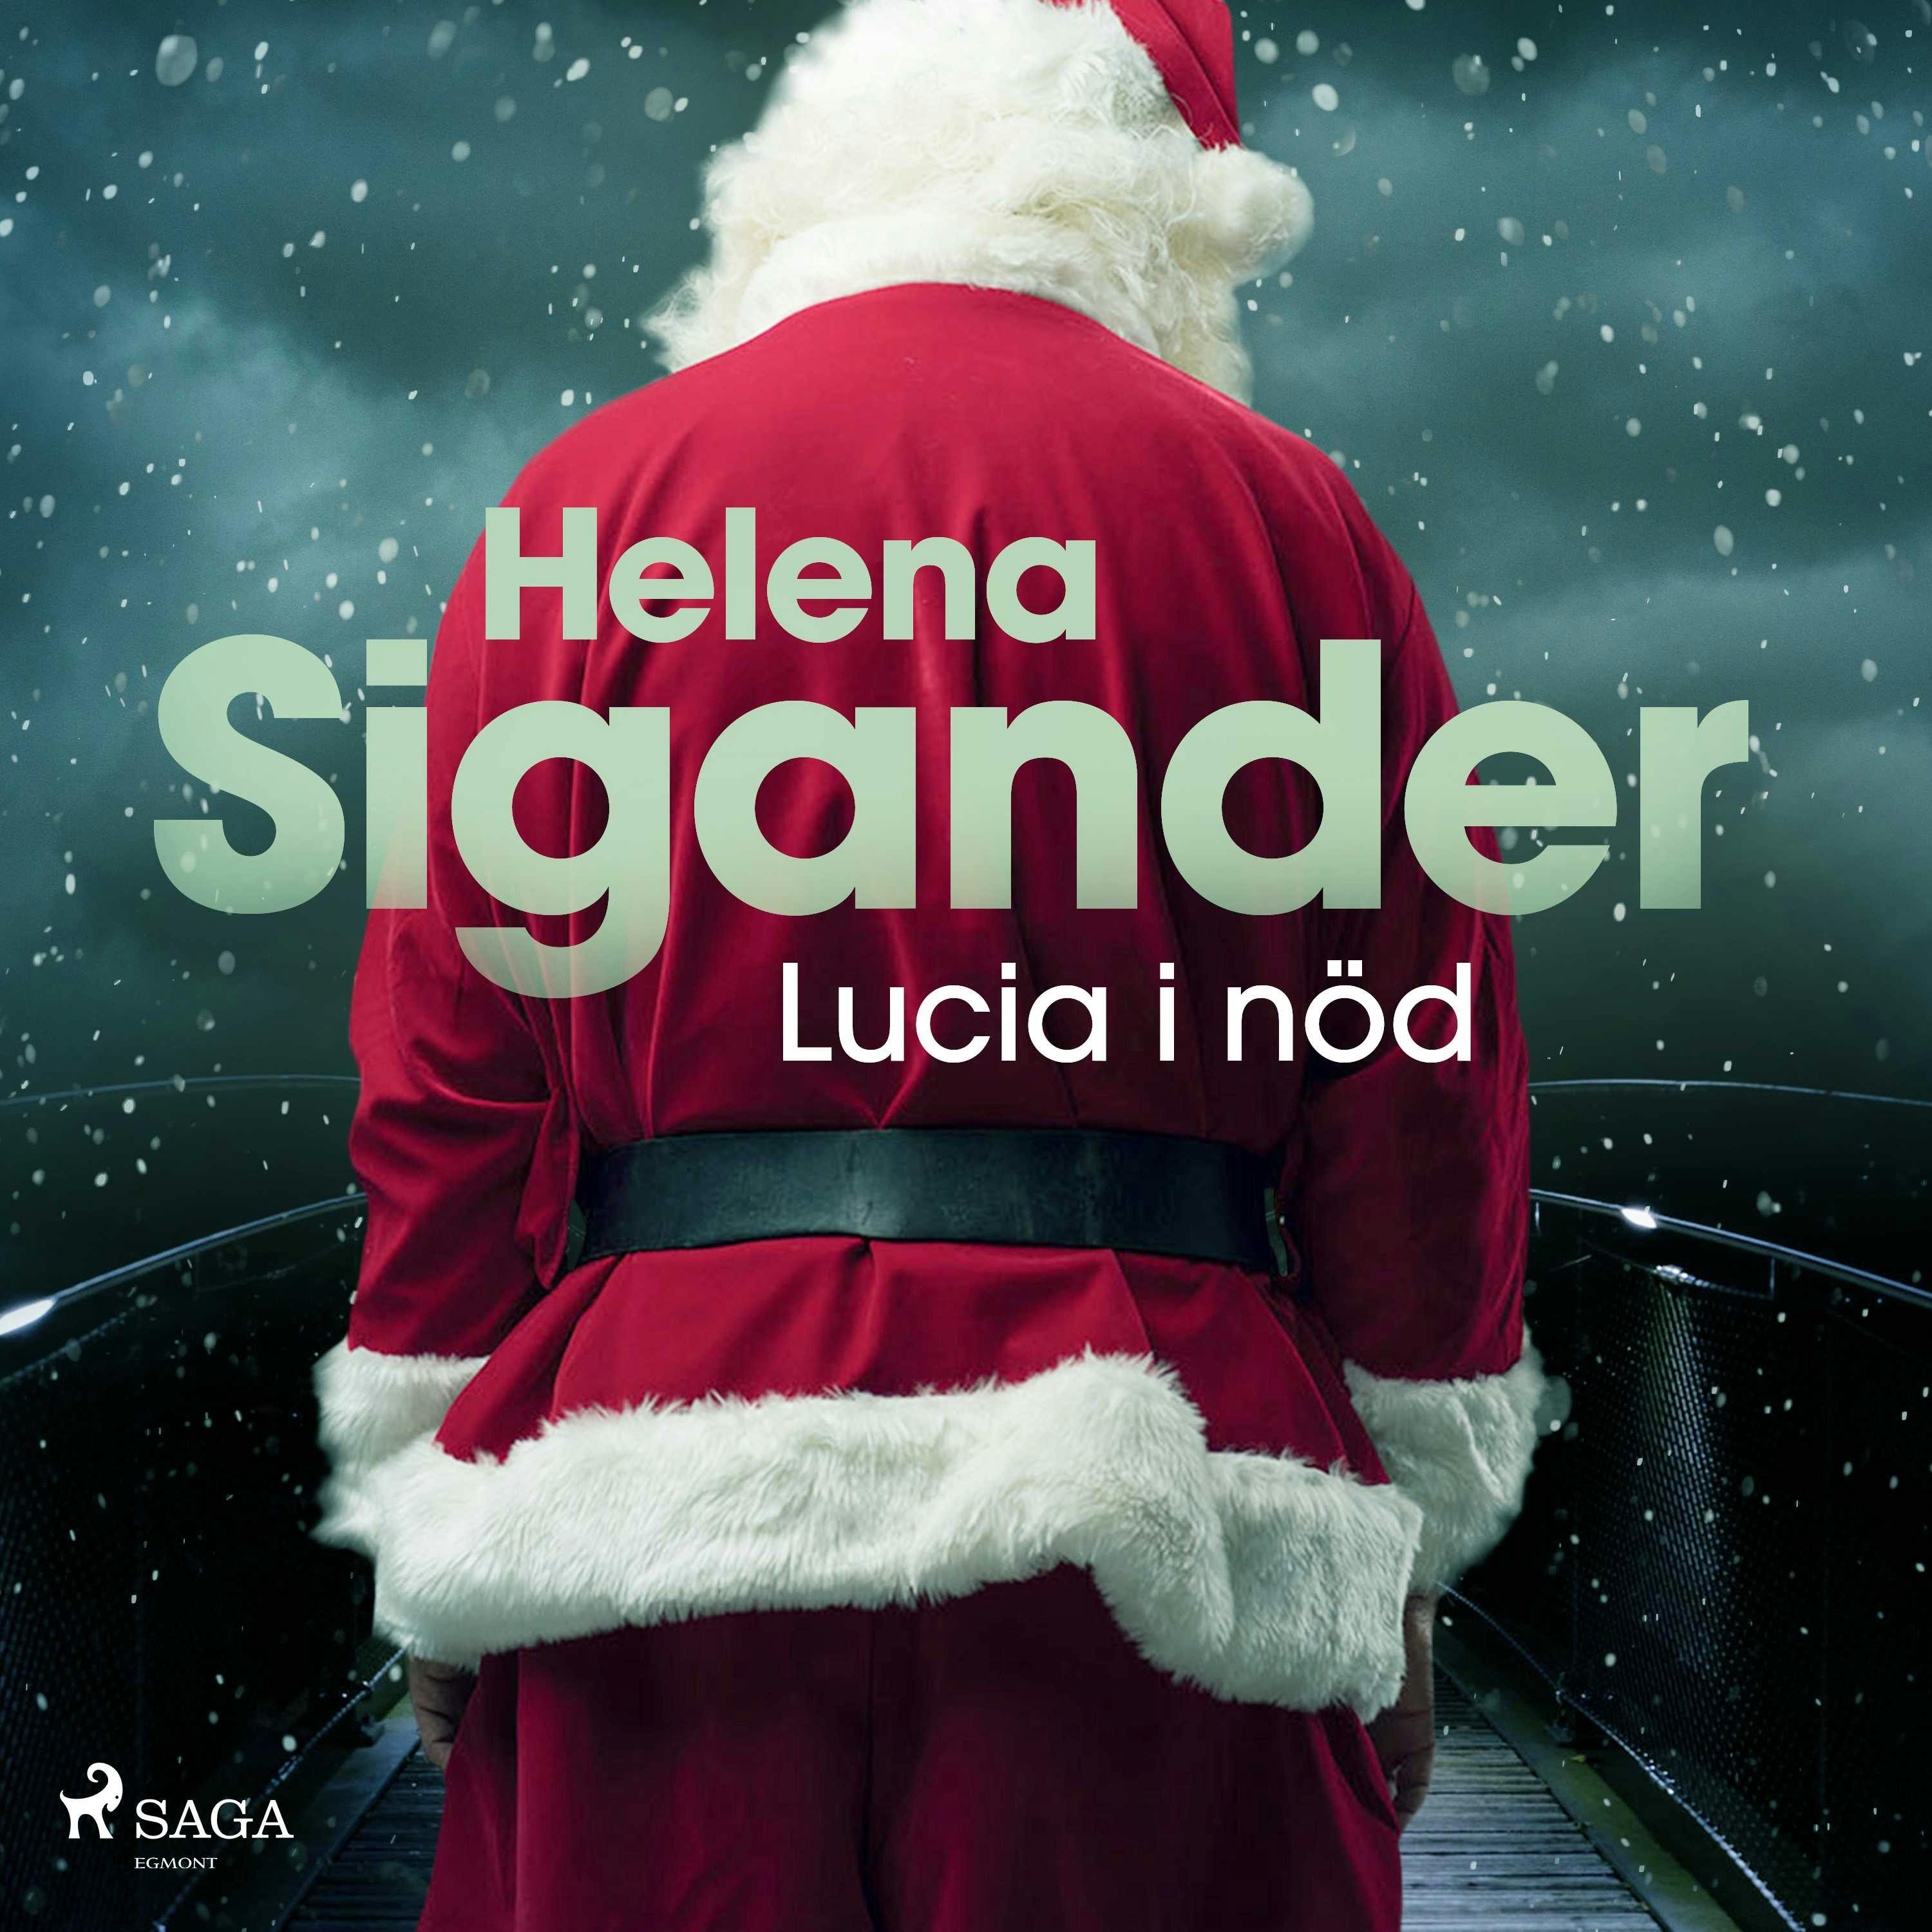 Lucia i nöd - undefined